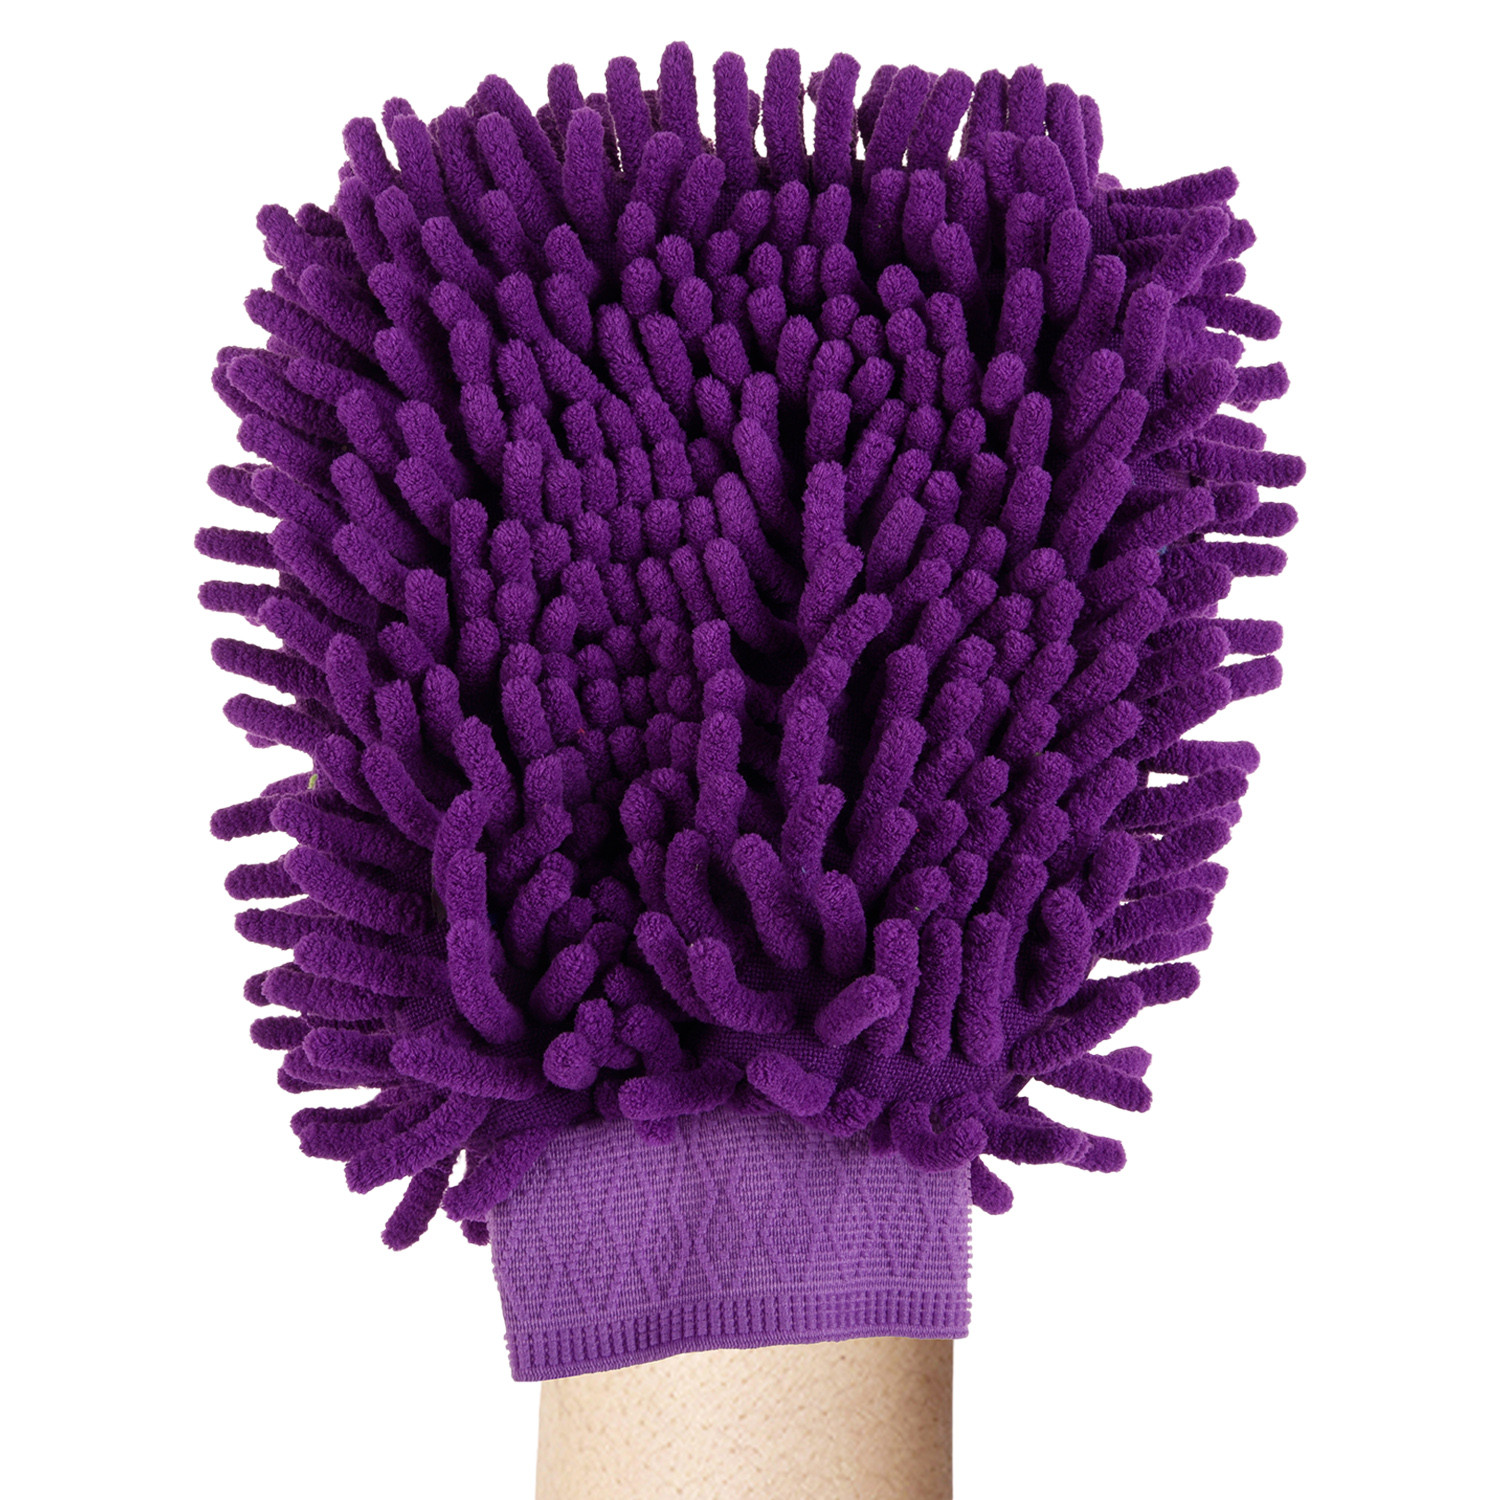 Kuber Industries Chenille Mitts|Microfiber Cleaning Gloves|Inside Waterproof Cloth Gloves|100 Gram Weighted Hand Duster|Chenille Gloves For Car|Glass|Pack of 2 (Purple & Dark Pink)